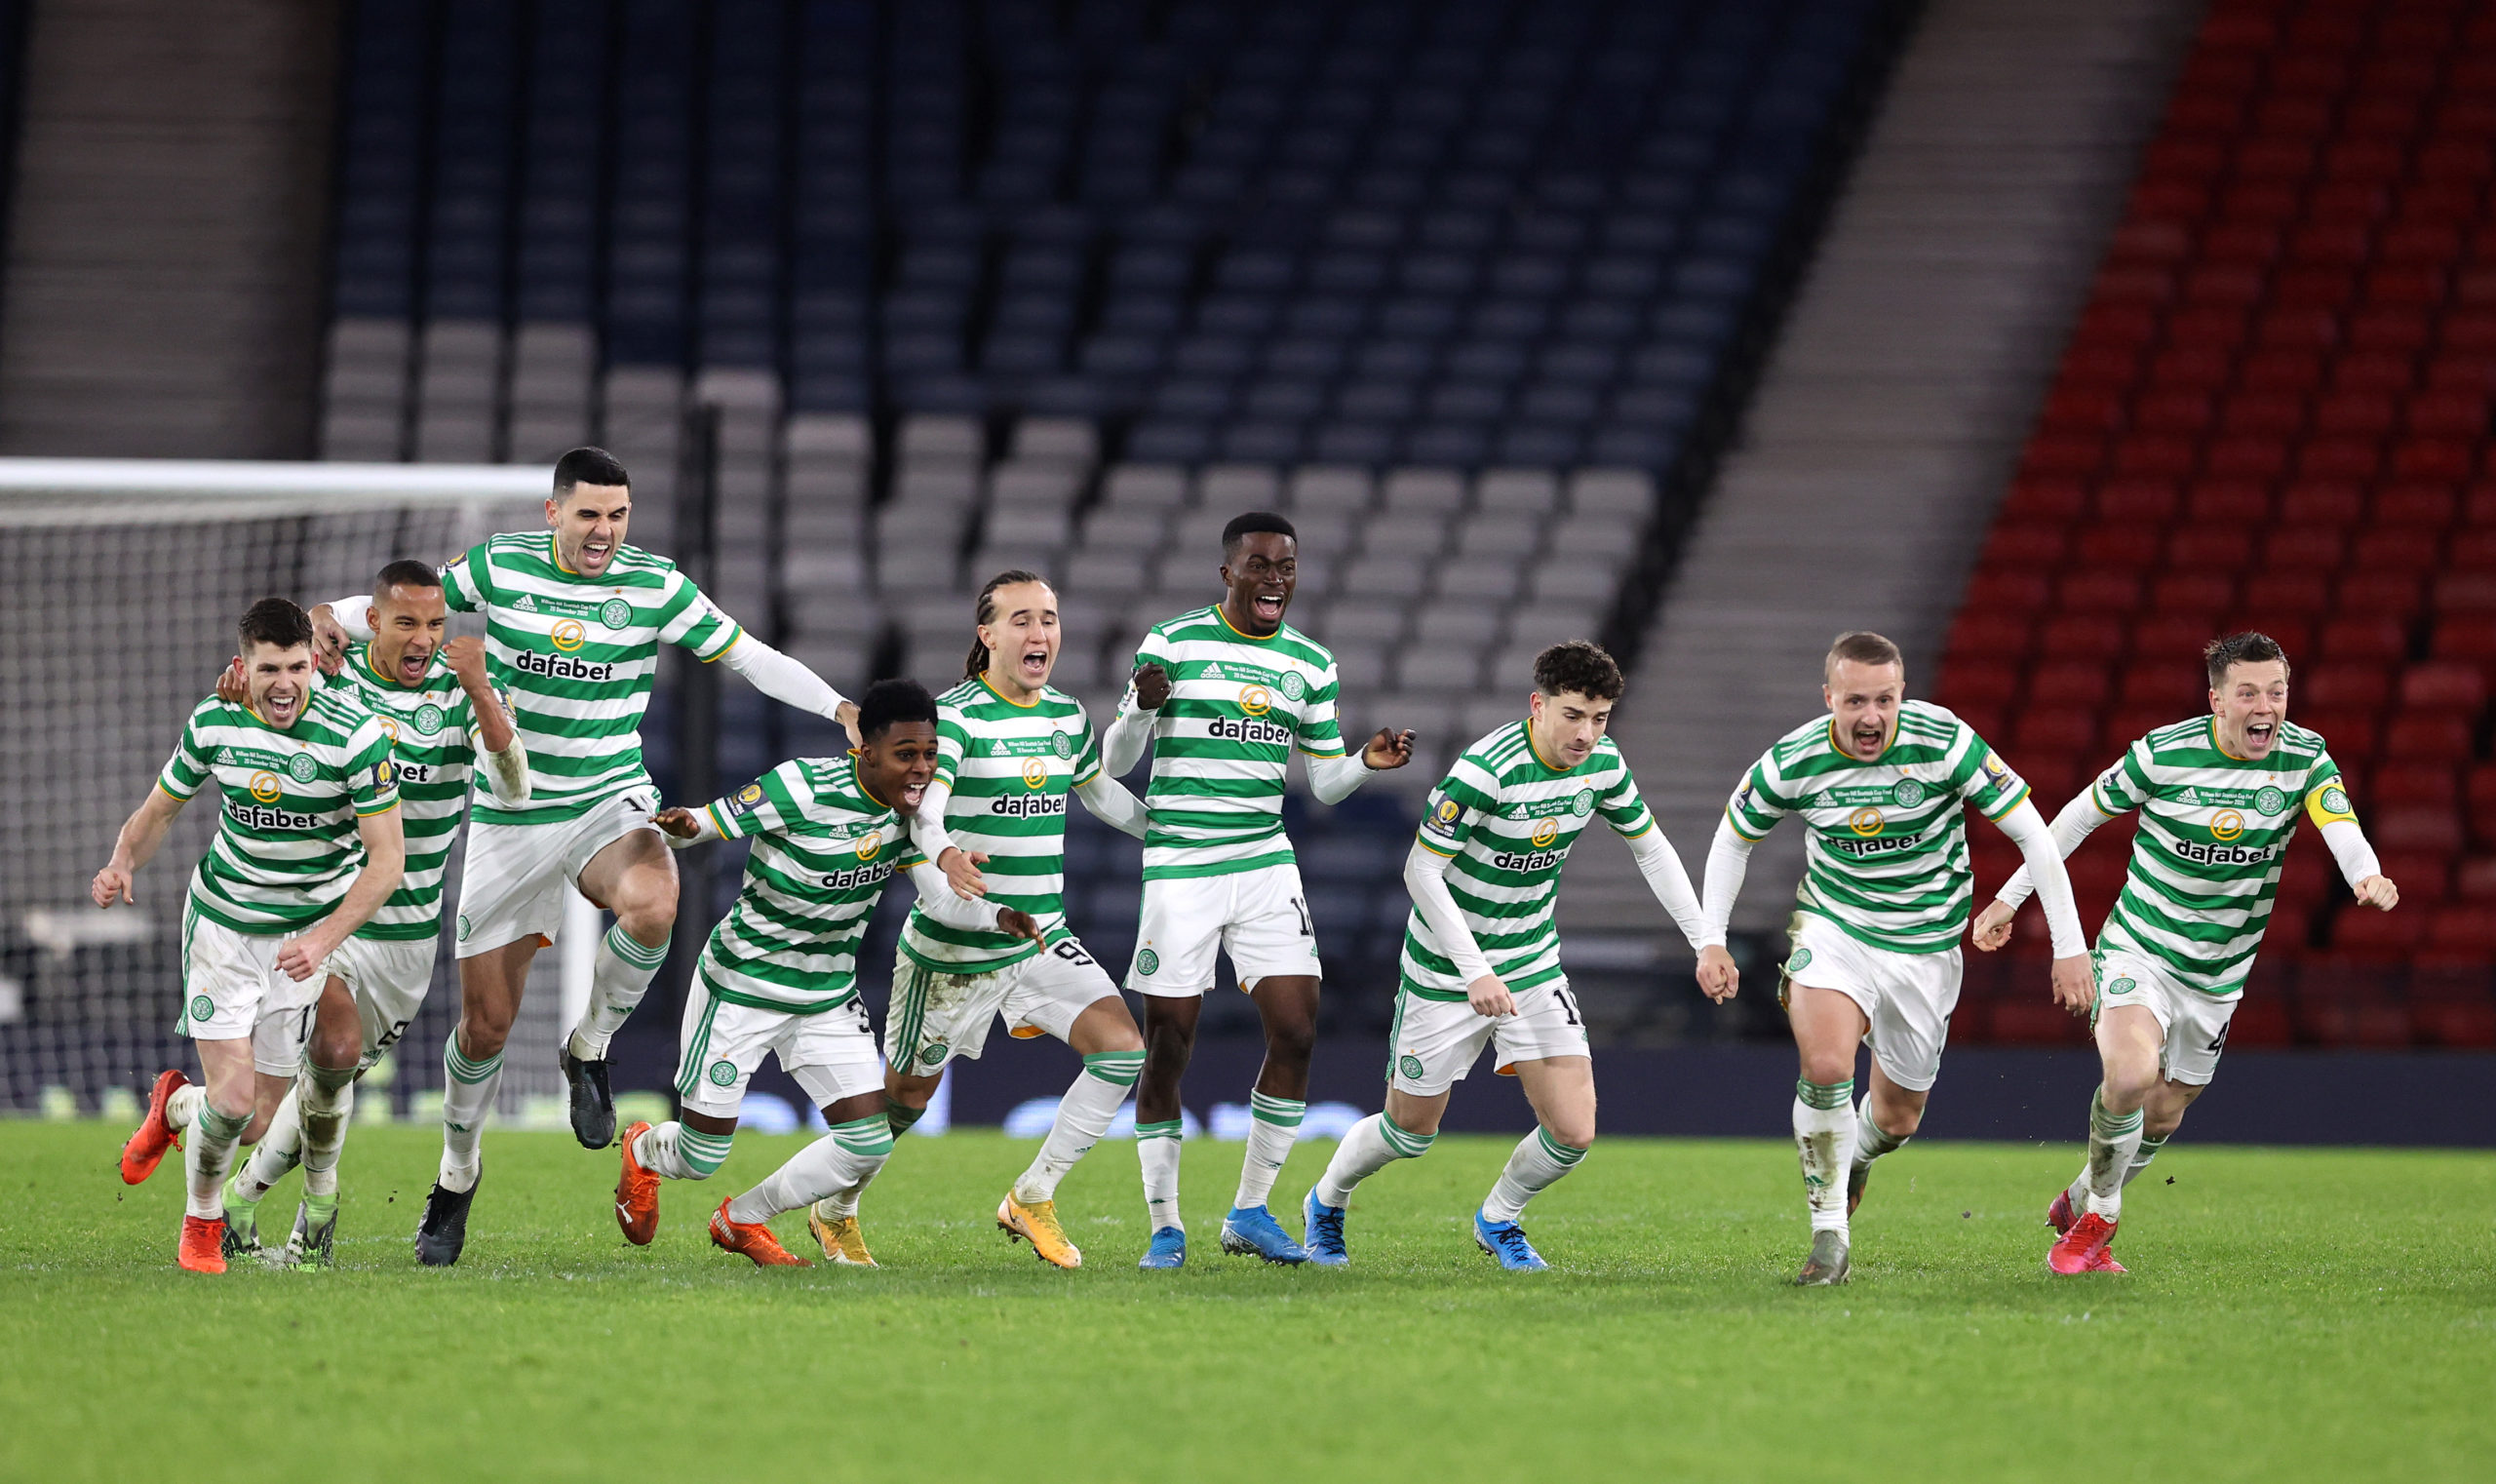 Scottish Cup win is the last chance for this incredible Celtic era